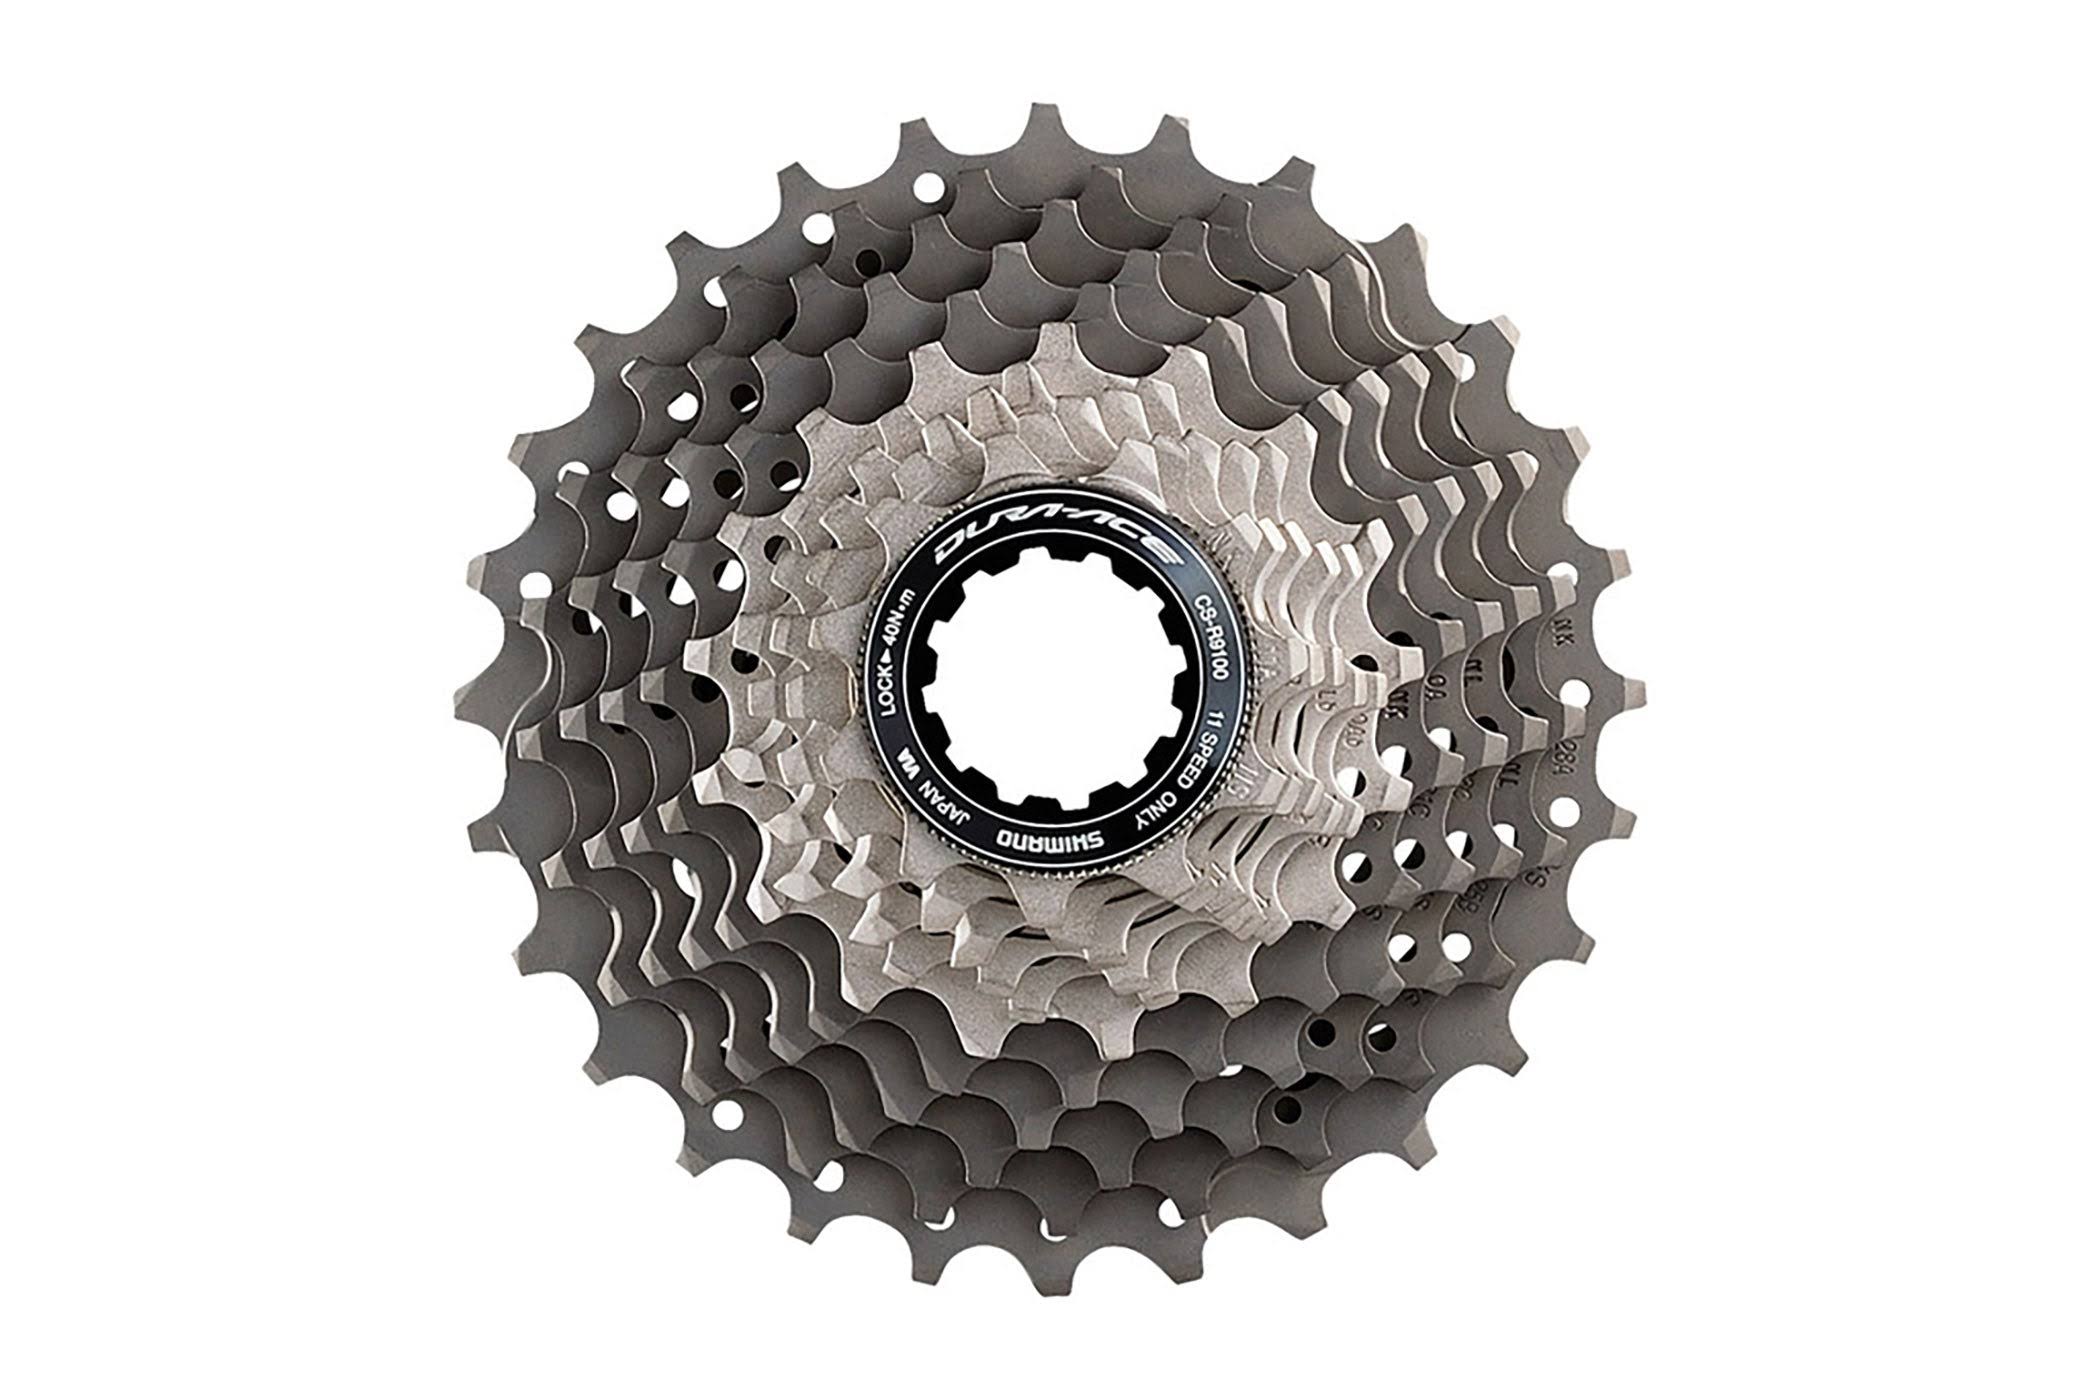 Shimano Dura-Ace R9100 Cassette - 11 Speed